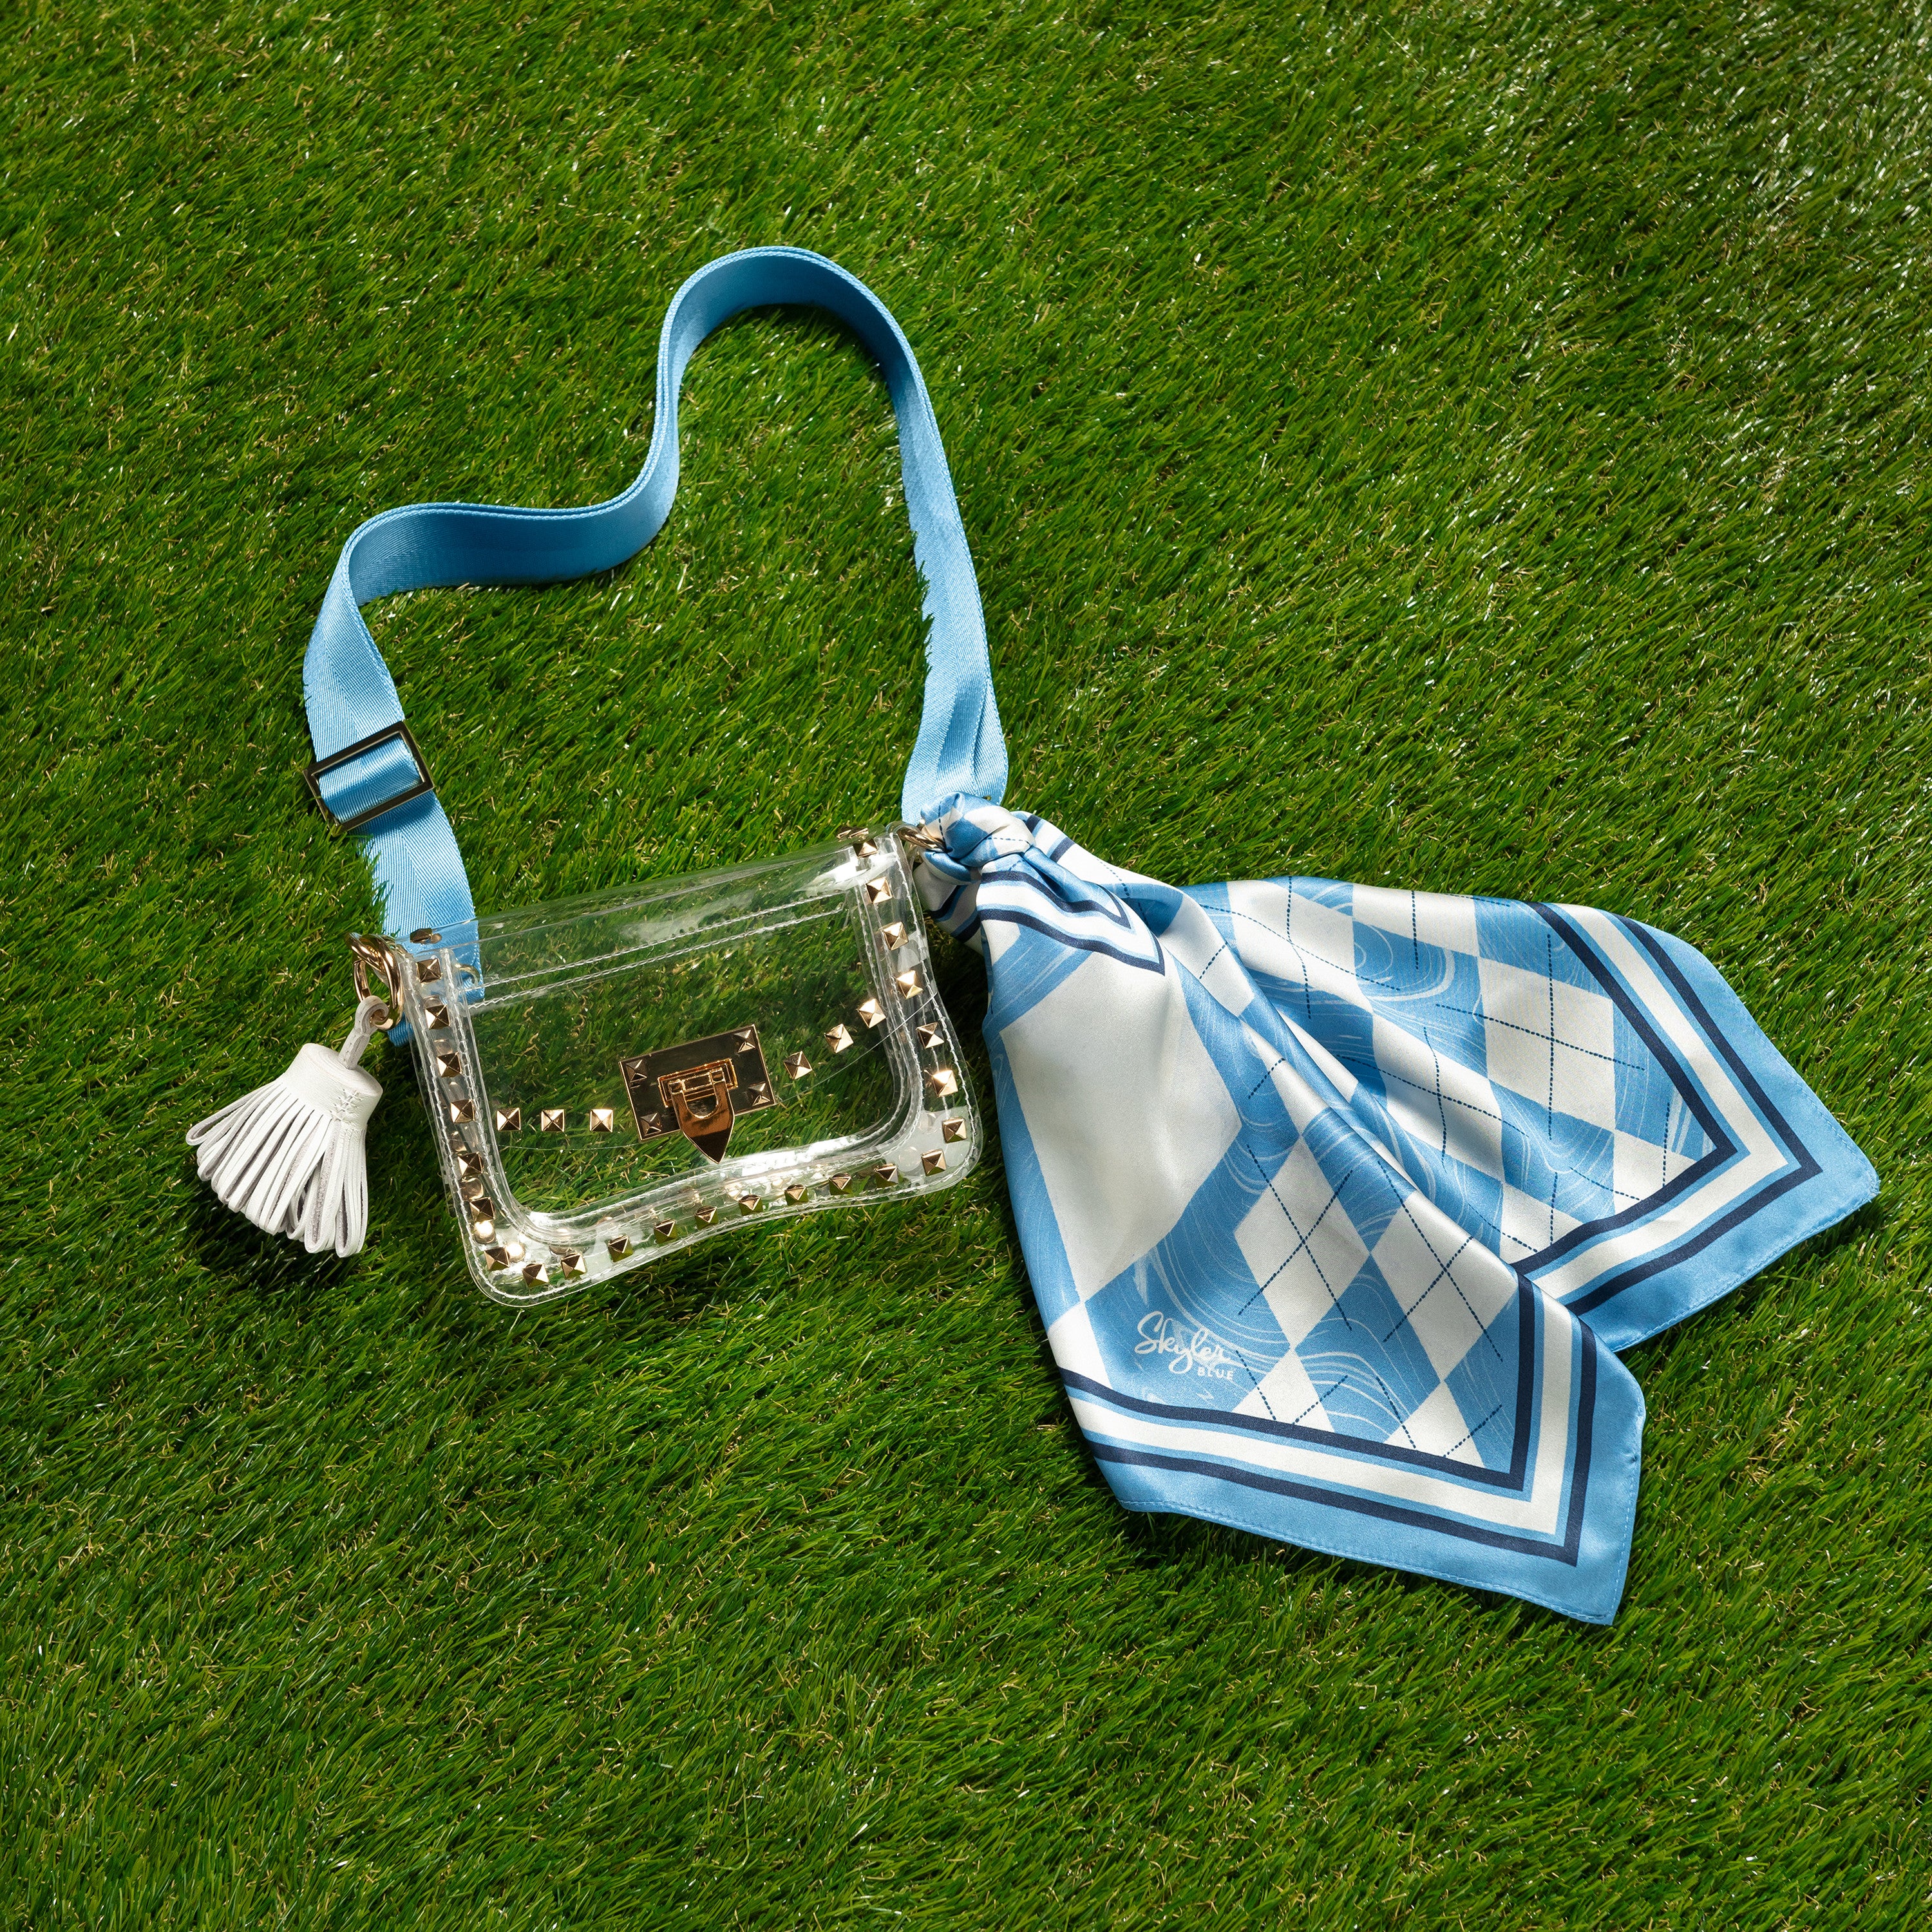 Skyler Blue’s The Chapel Hill Small Studded Clear Bag stadium approved clear bag / clear purse including adjustable, nylon webbing shoulder or crossbody strap with herringbone weave and gold hardware, 60-centimeter 100% silk twill scarf, and 100% genuine leather tassel. 